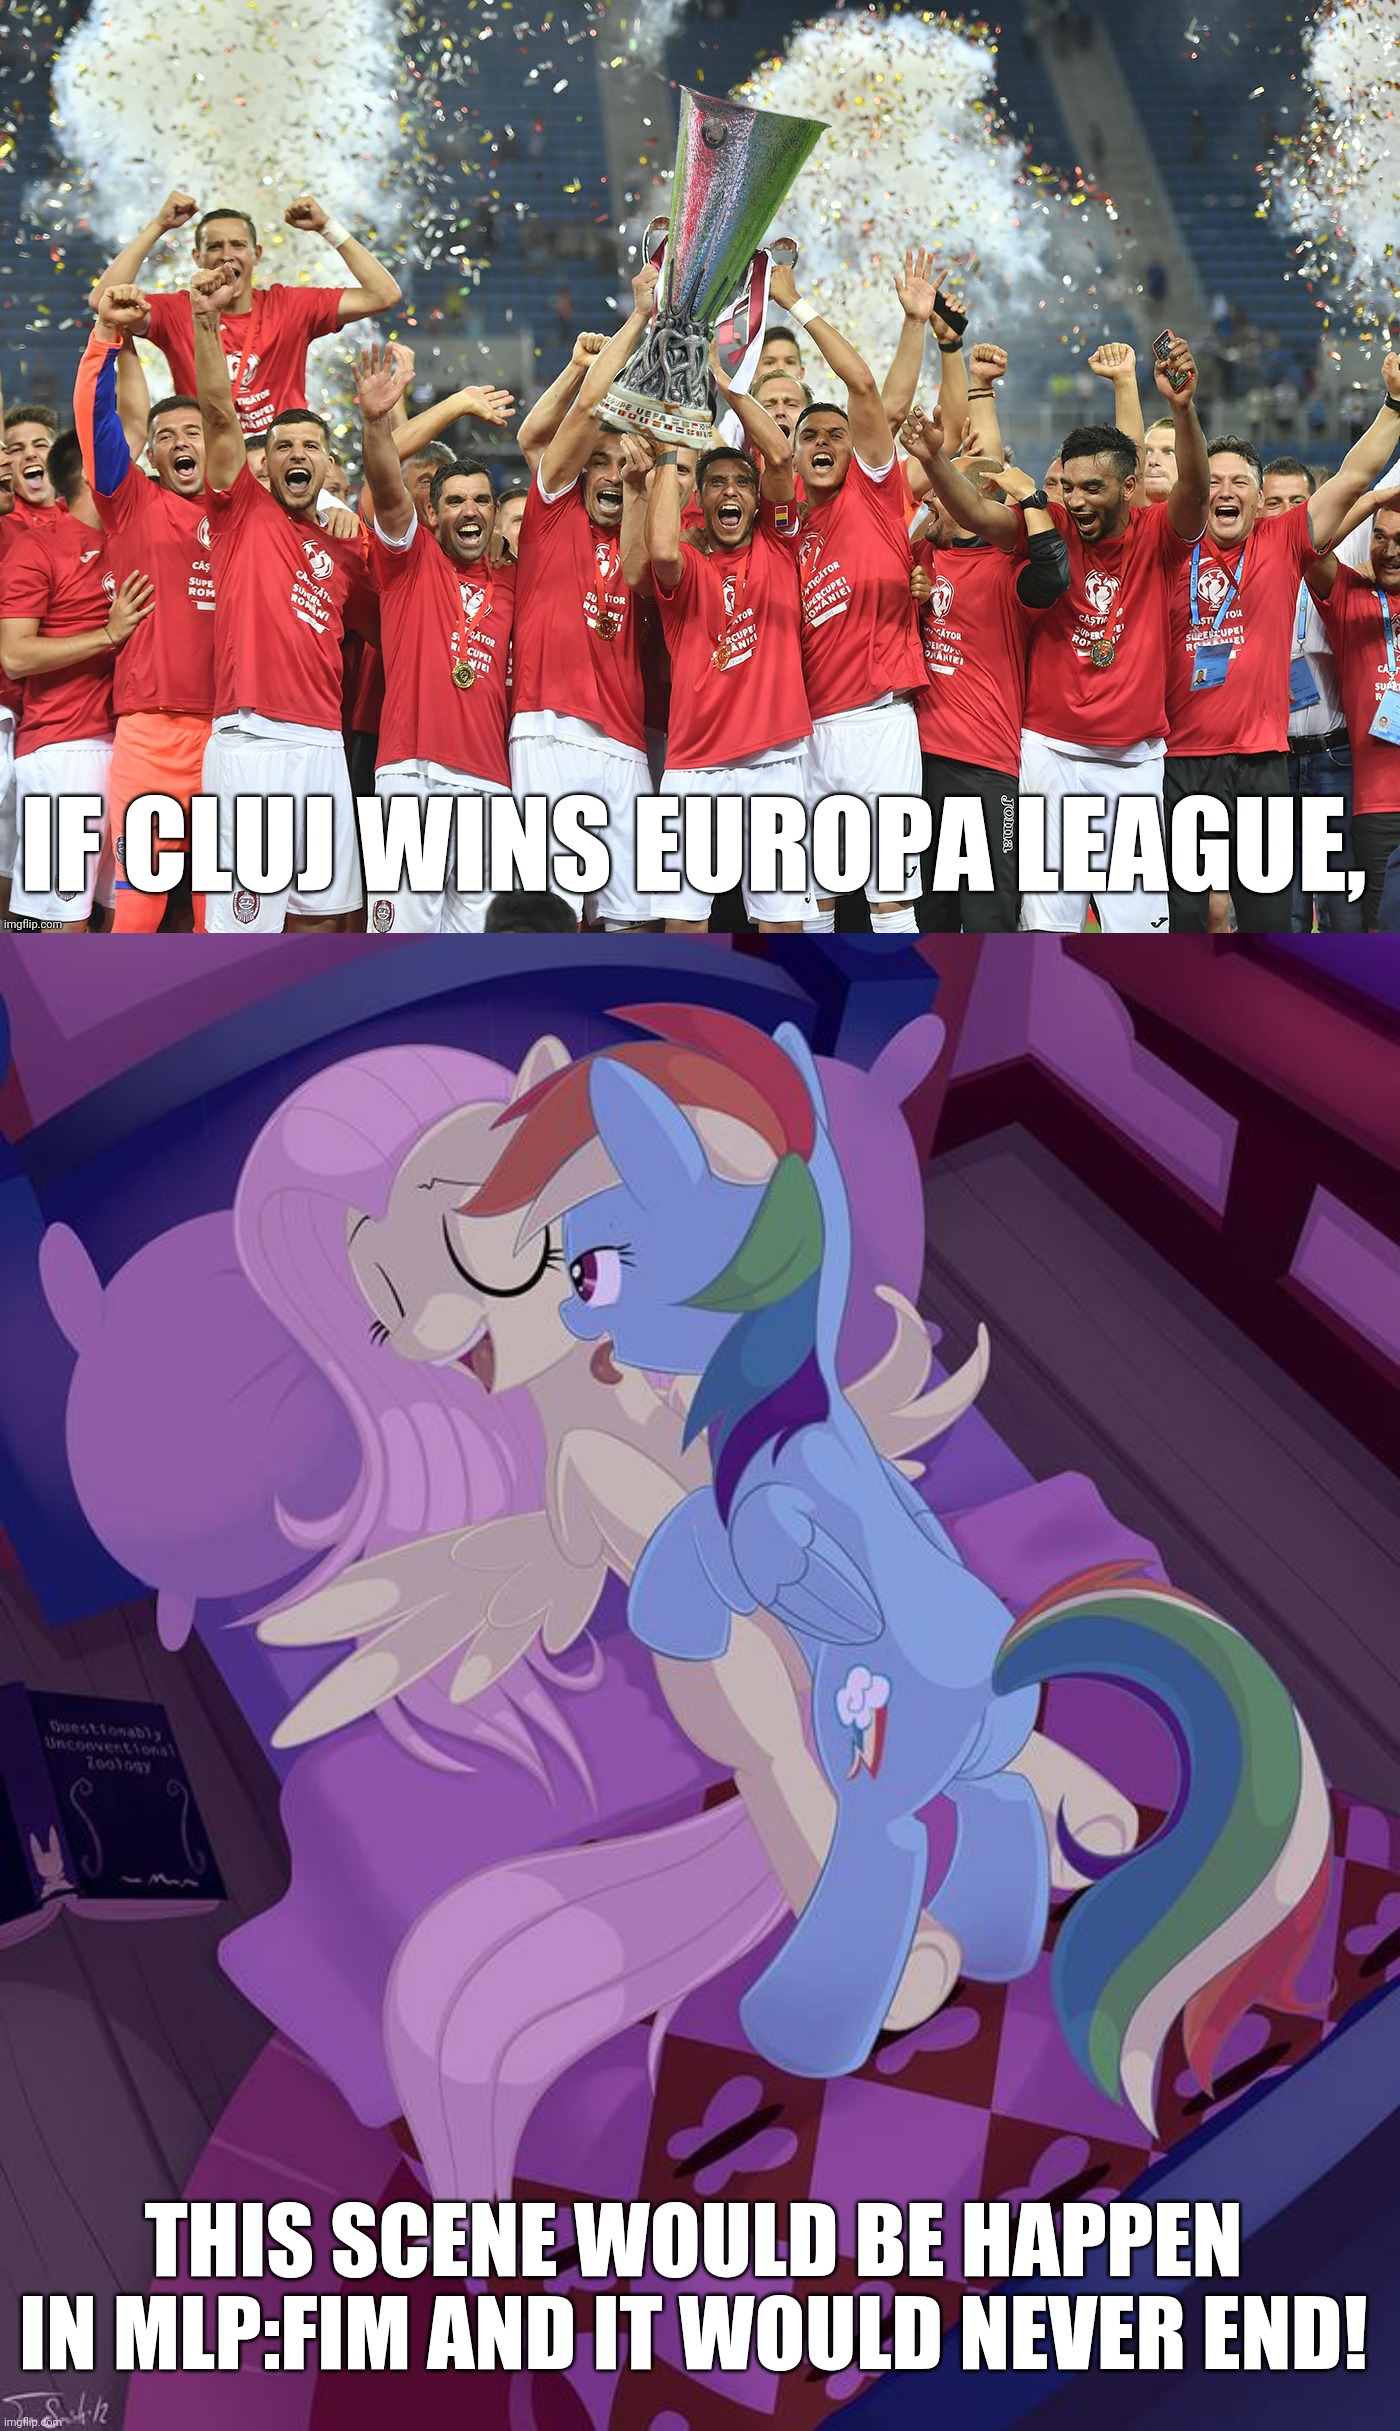 Admit it! | IF CLUJ WINS EUROPA LEAGUE, THIS SCENE WOULD BE HAPPEN IN MLP:FIM AND IT WOULD NEVER END! | image tagged in memes,cfr cluj,mlp fim,funny | made w/ Imgflip meme maker